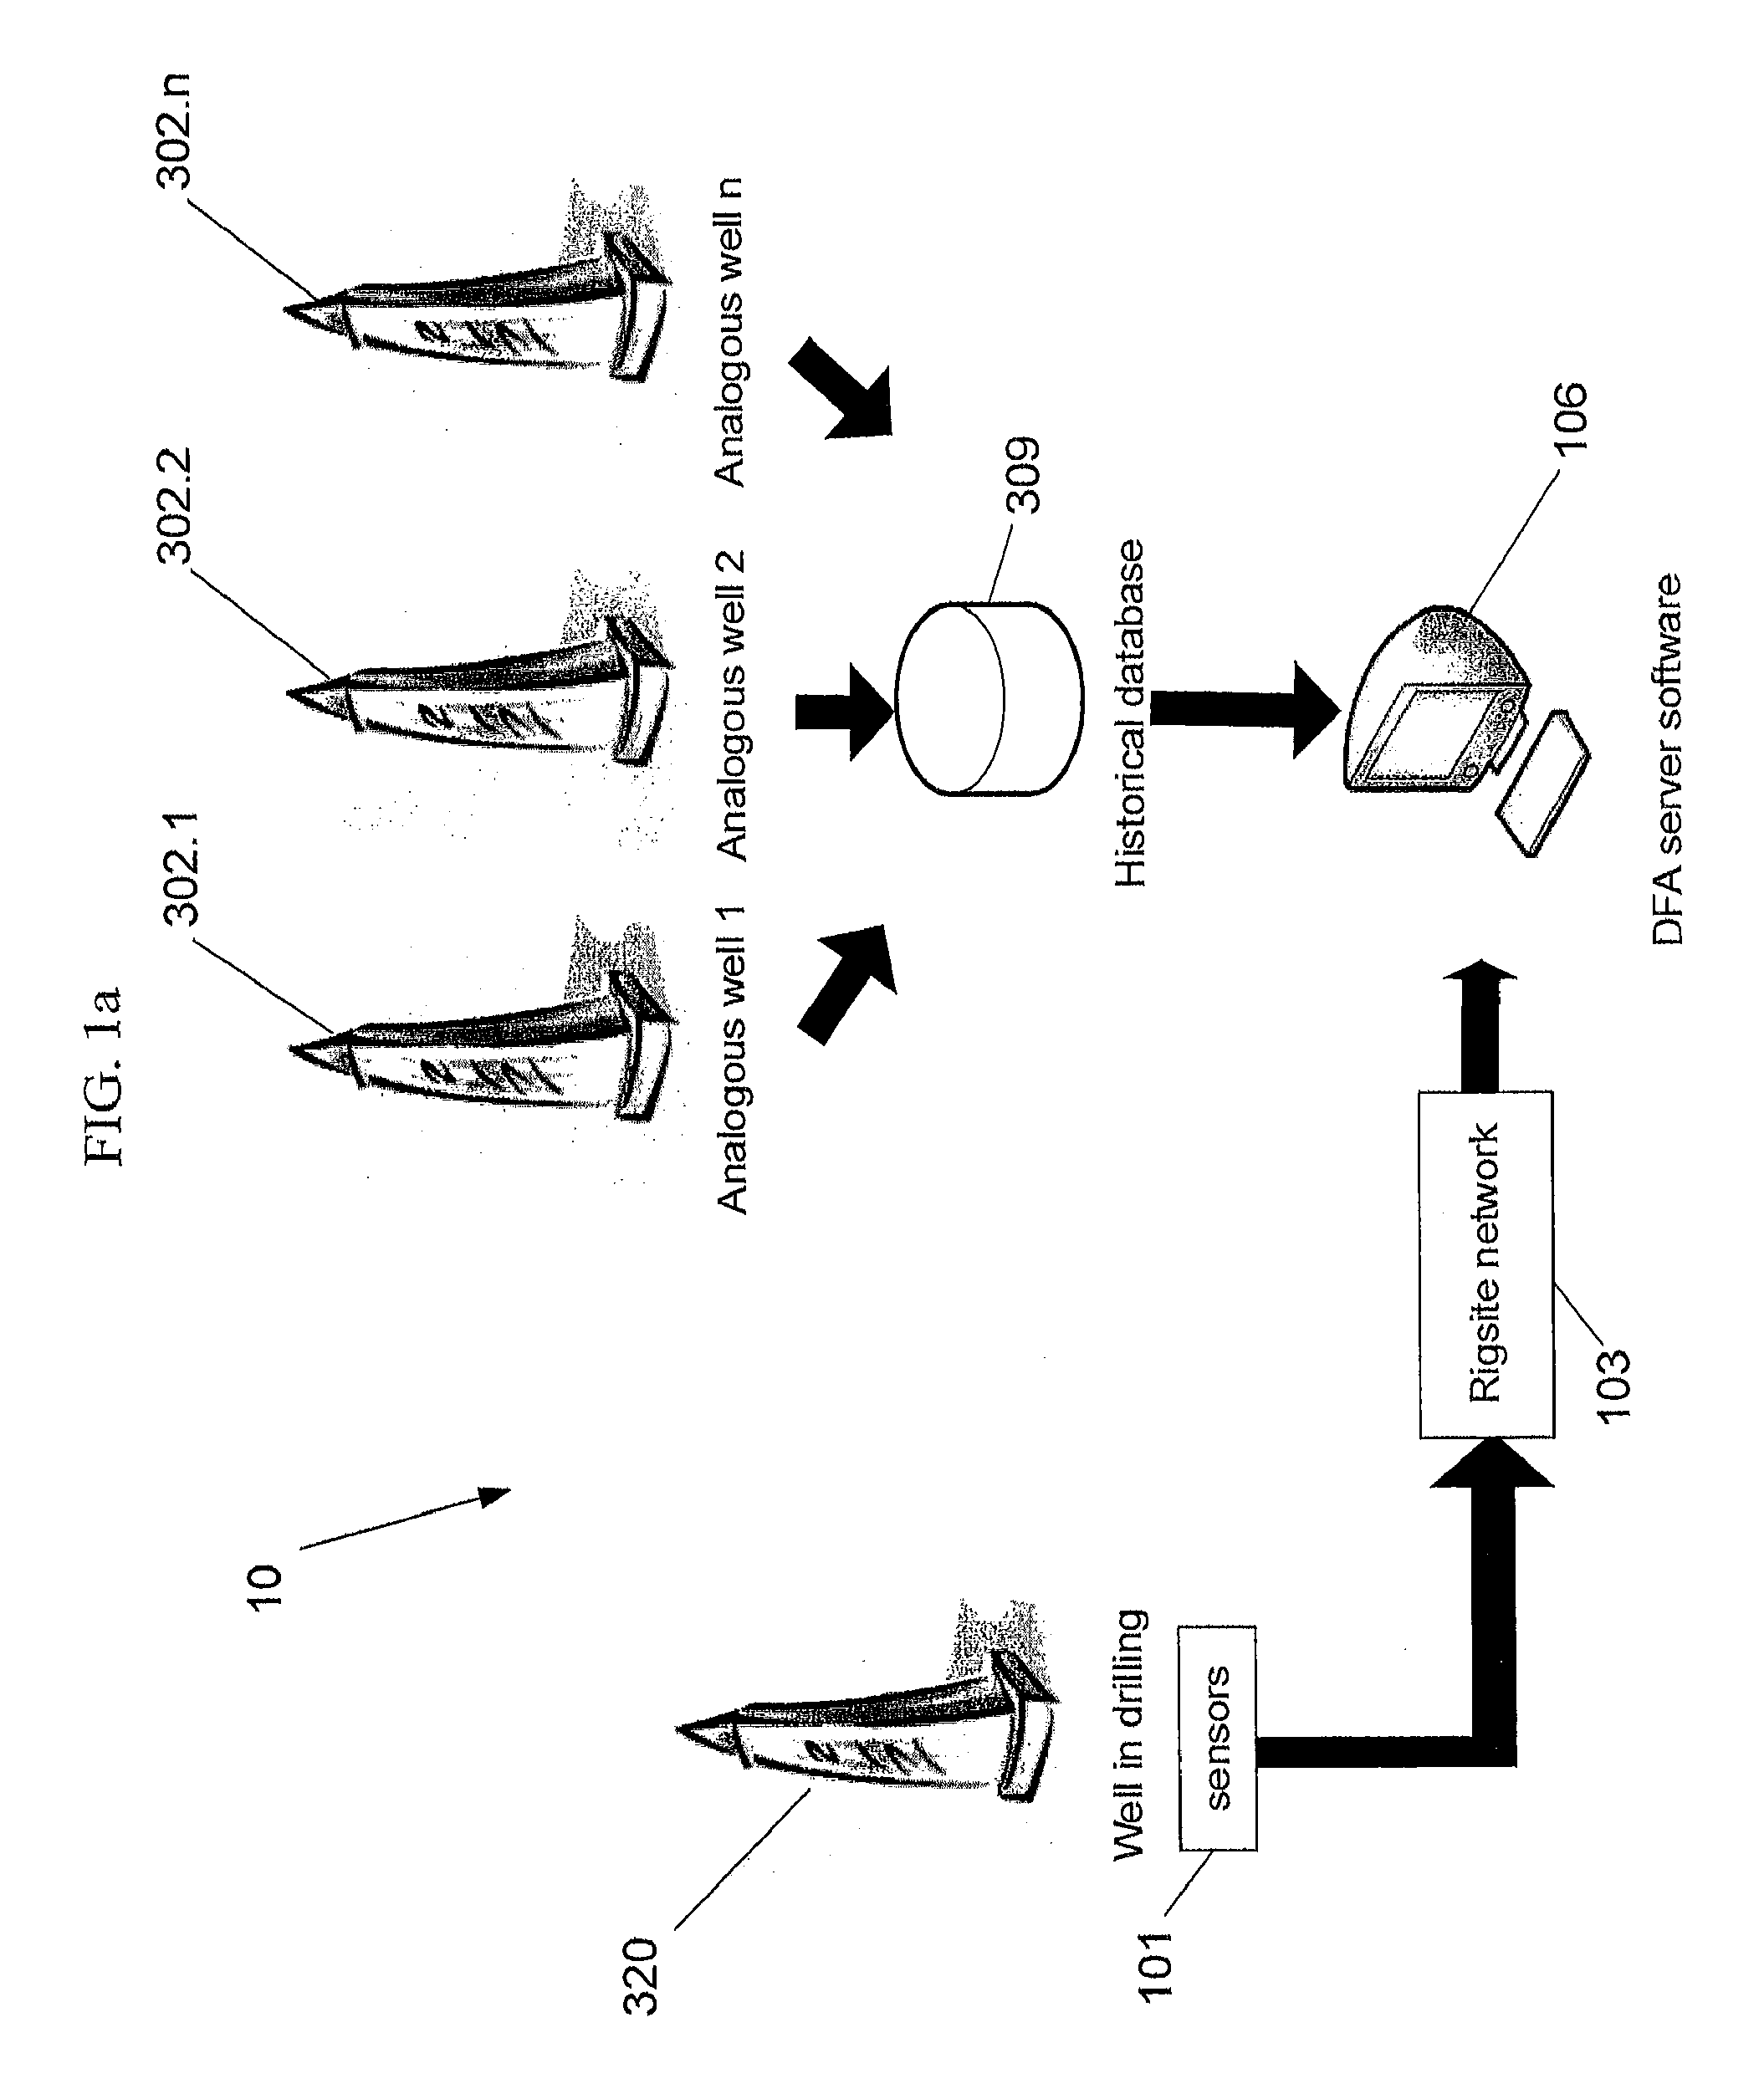 Methods and systems for improved drilling operations using real-time and historical drilling data